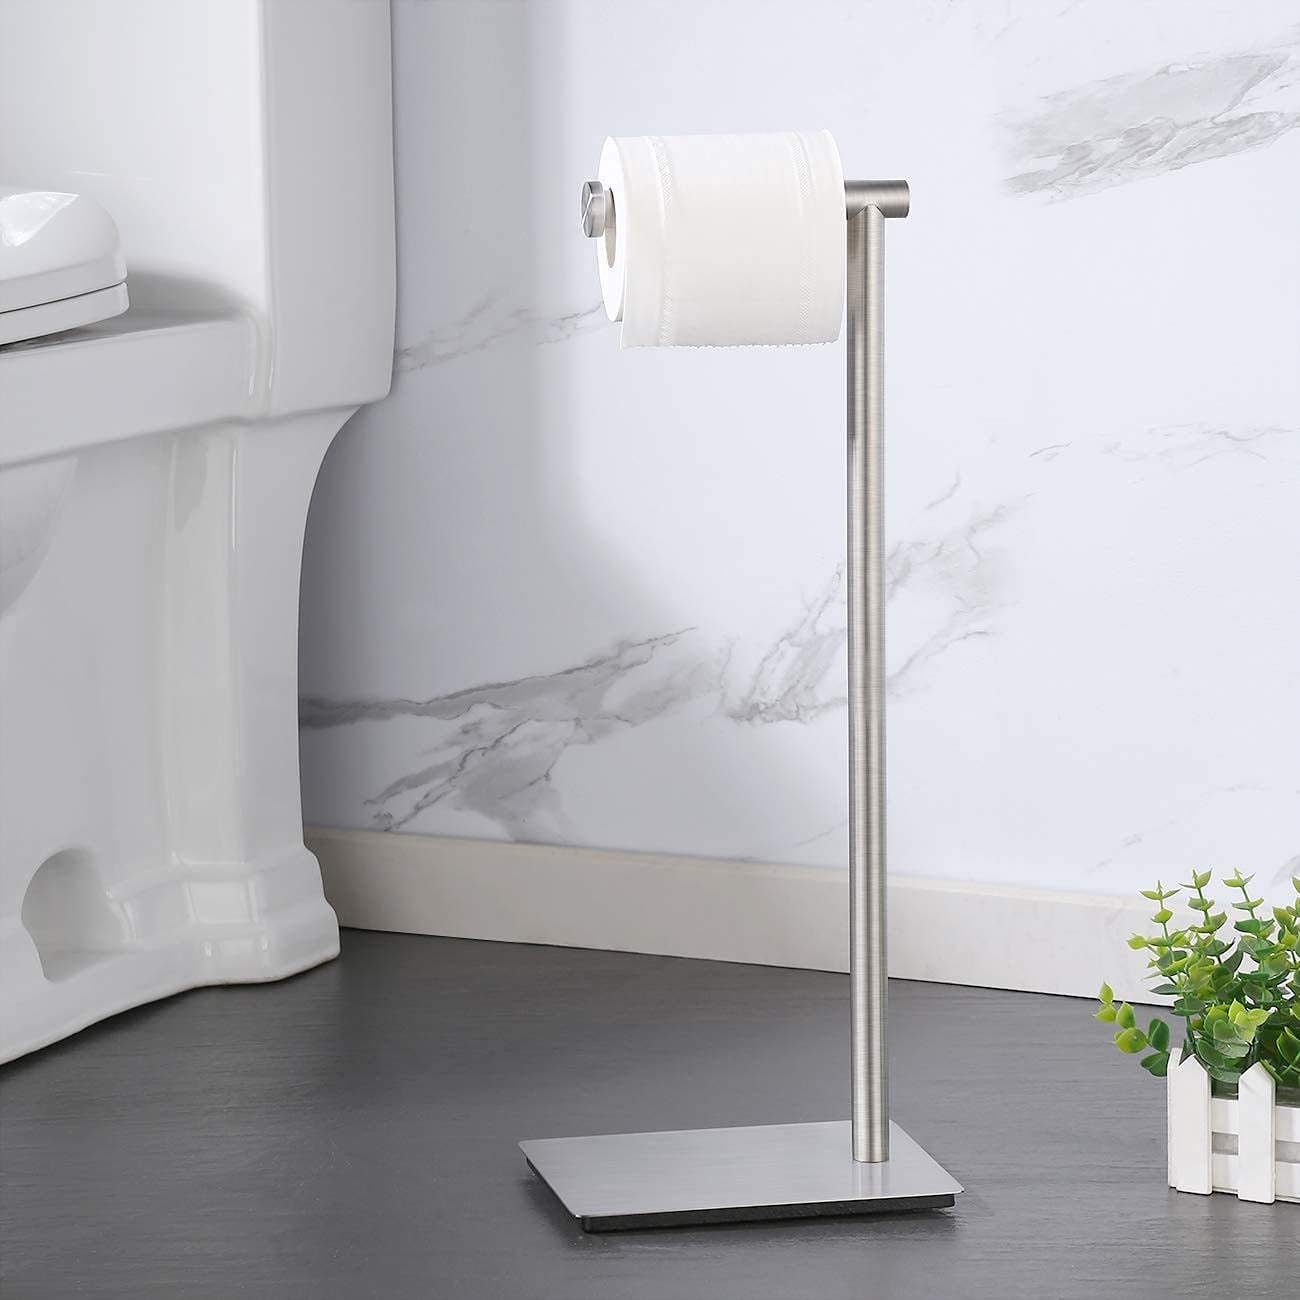 https://ak1.ostkcdn.com/images/products/is/images/direct/40d6a3e8201f44723c5b20dd00e4179eb6b9868c/Freestanding-Toilet-Paper-Holder.jpg